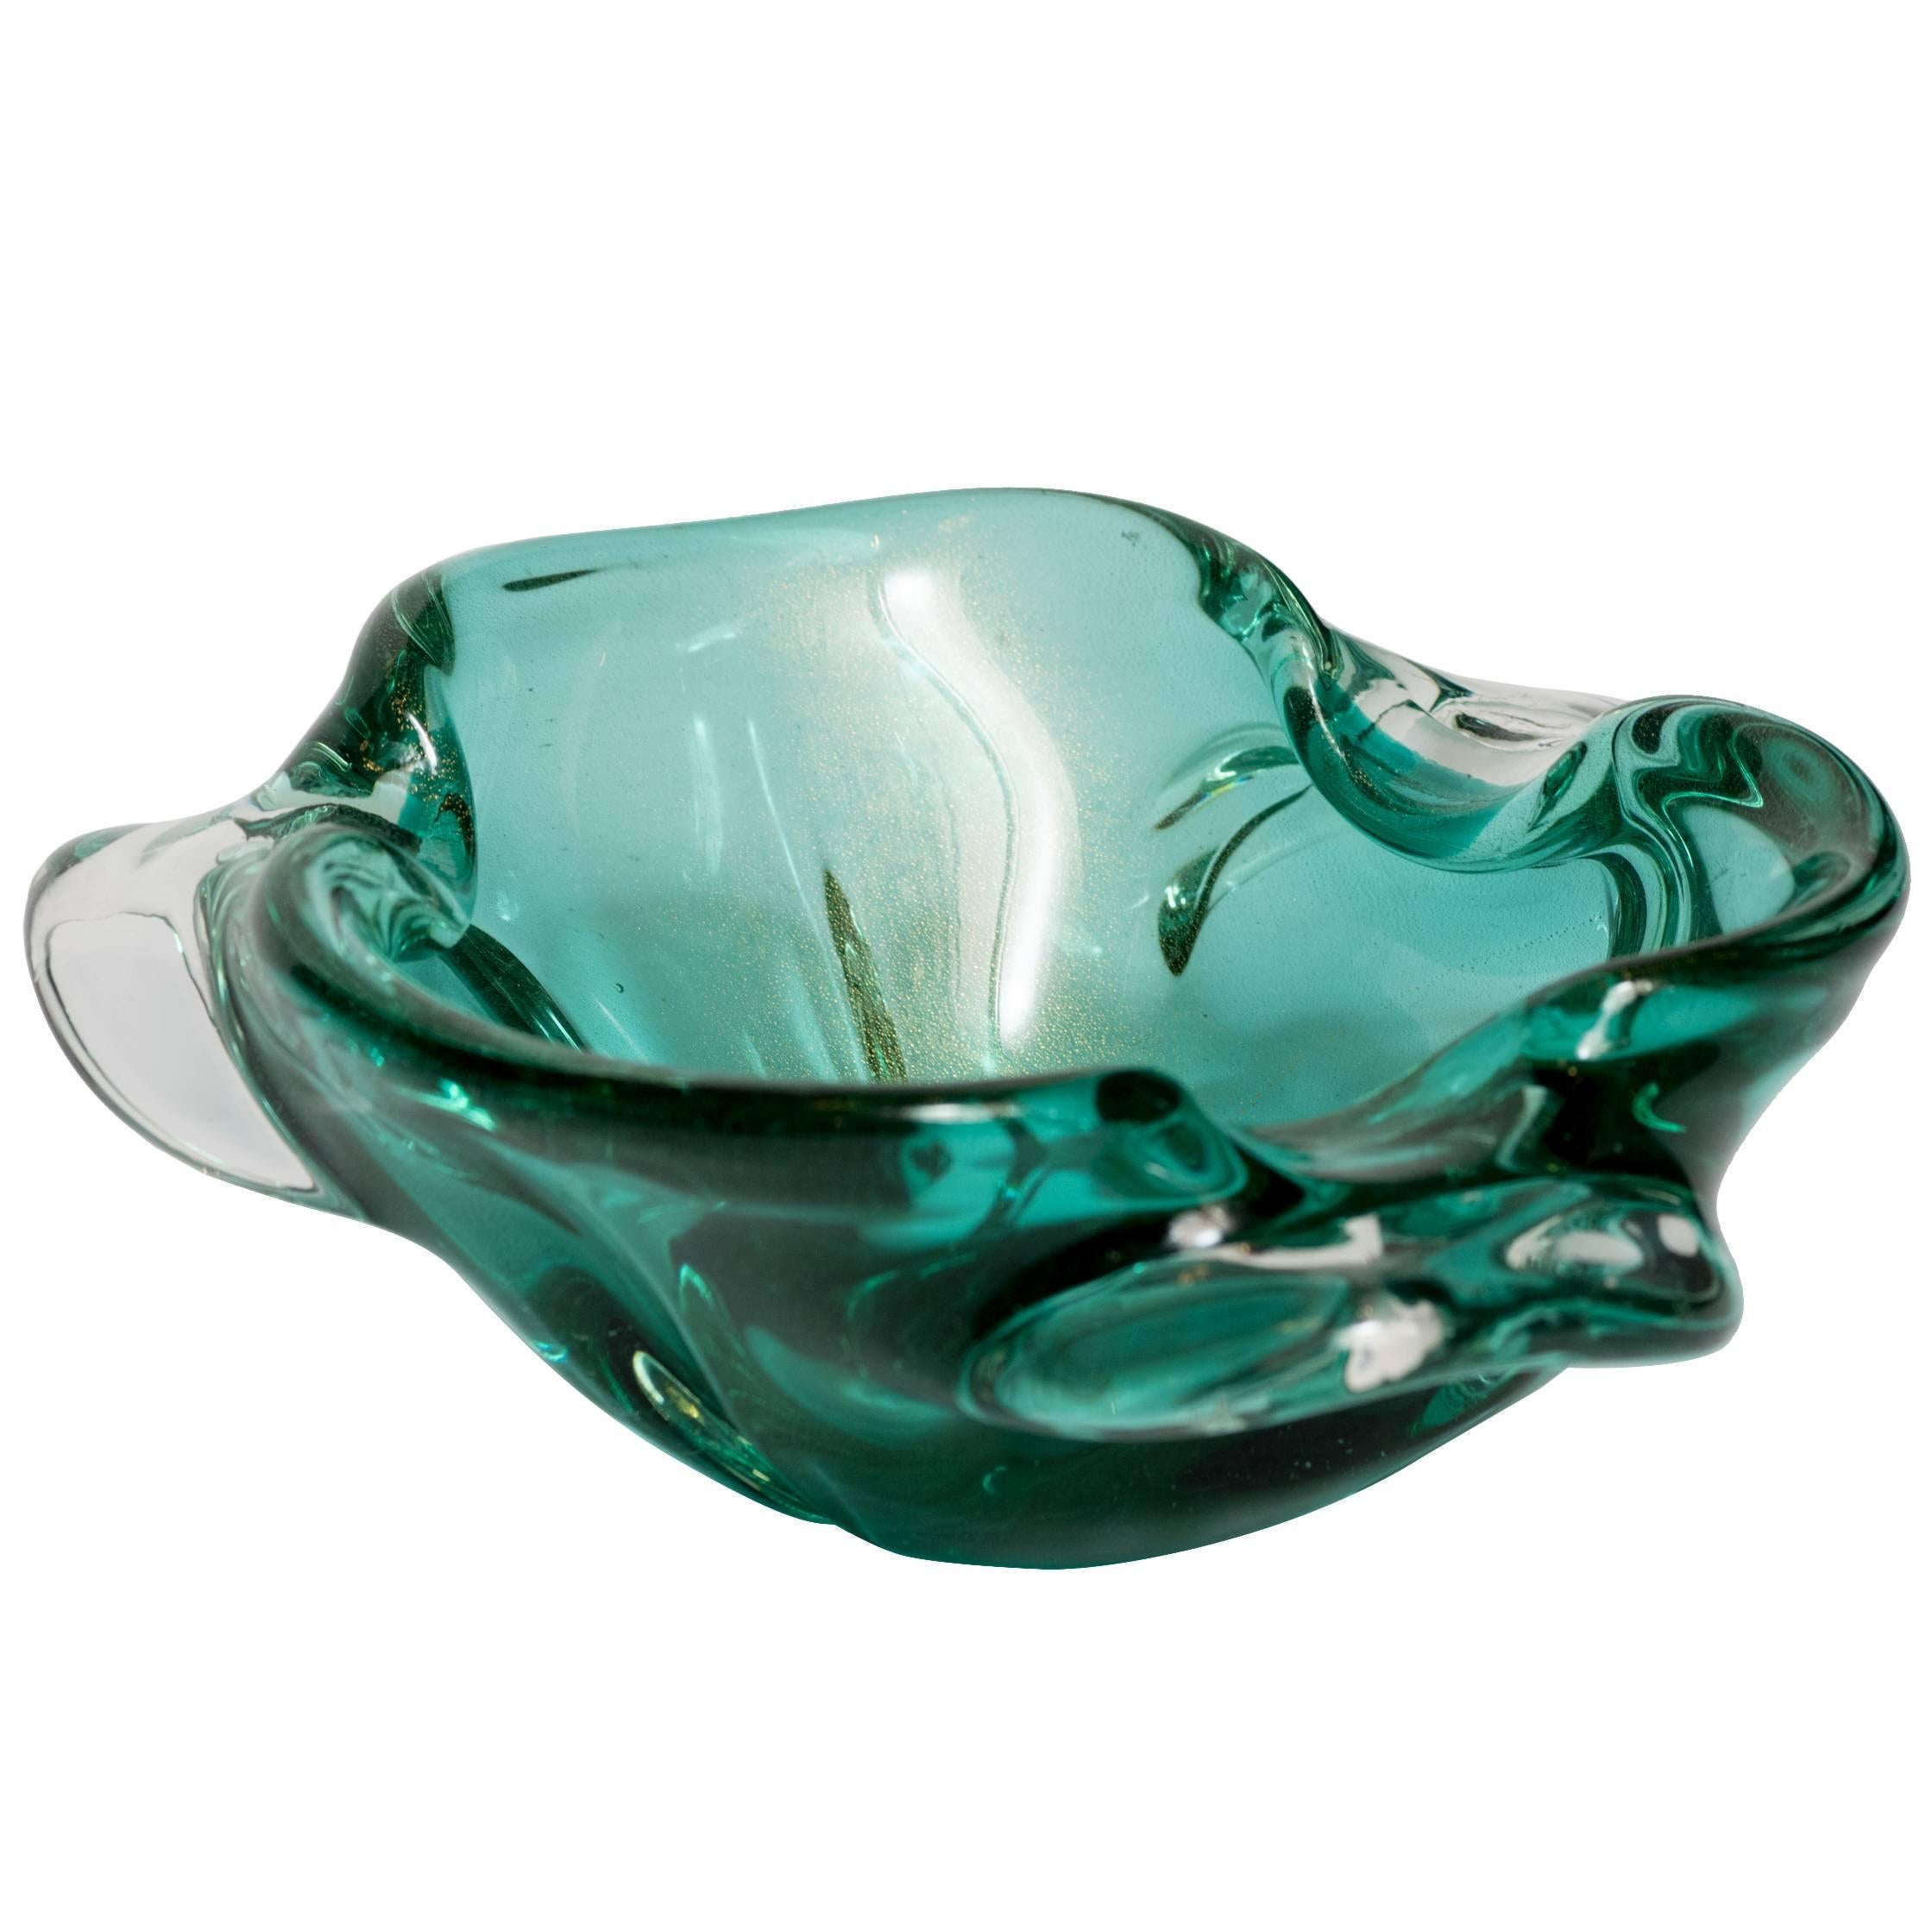 Italian vintage glass bowl and ashtray with organic form. Comprised of handblown Murano glass in hues of emerald green with gold fleck details. Beautiful from every angle, the bowl features pinched rim design with trilateral winged sides.